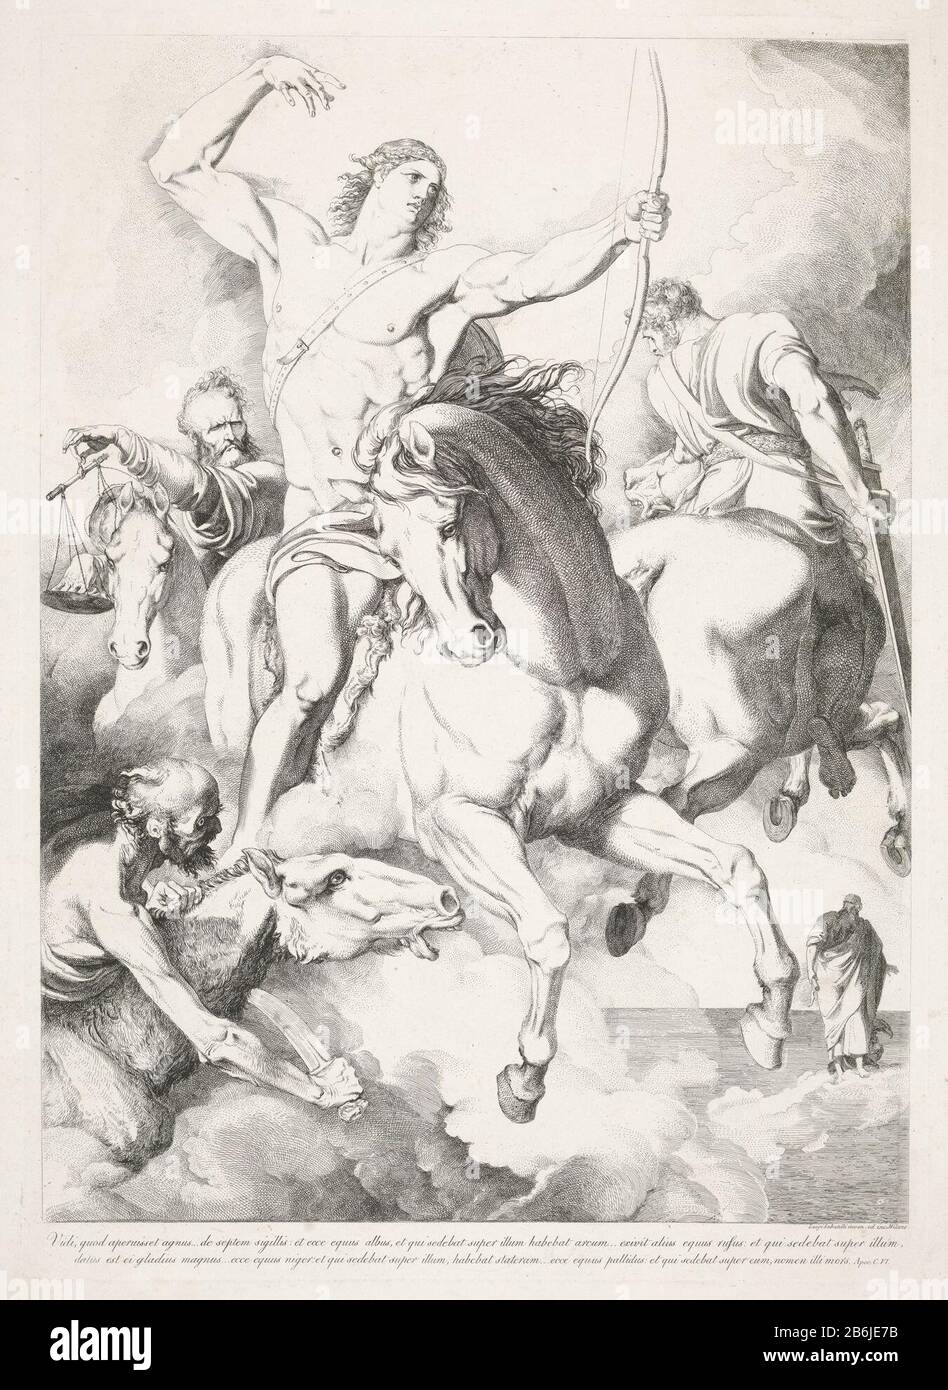 The four apocalyptic horsemen Amidst an apocalyptic horseman with arrow and arc. Around him the rider with balance, with a sword and a heavy d. In the background right (on earth) the apostle John with his attribute the eagle, looking up at the riders in the wolken. Manufacturer : printmaker Luigi Sabatelli (I) (listed building) in its design: Luigi Sabatelli (I) ( listed on object) Place manufacture: Milan Date: 1782 - 1850 Physical features: etching material: paper Technique: etching dimensions: plate edge: h 630 mm × W 453 mm Subject: the four horsemen of the Apocalypse Stock Photo